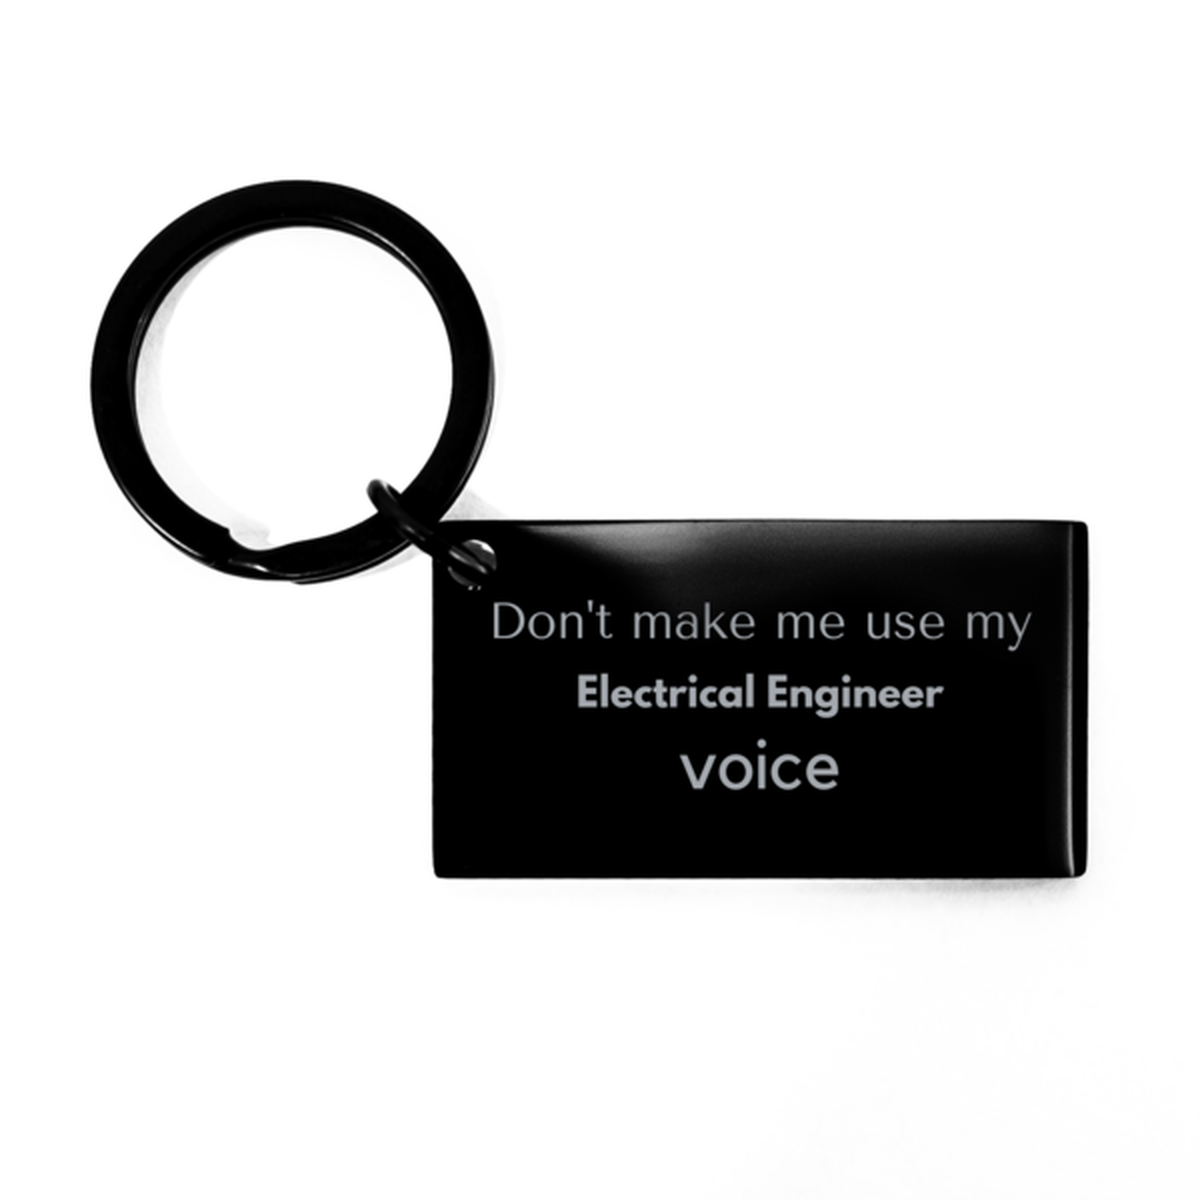 Don't make me use my Electrical Engineer voice, Sarcasm Electrical Engineer Gifts, Christmas Electrical Engineer Keychain Birthday Unique Gifts For Electrical Engineer Coworkers, Men, Women, Colleague, Friends